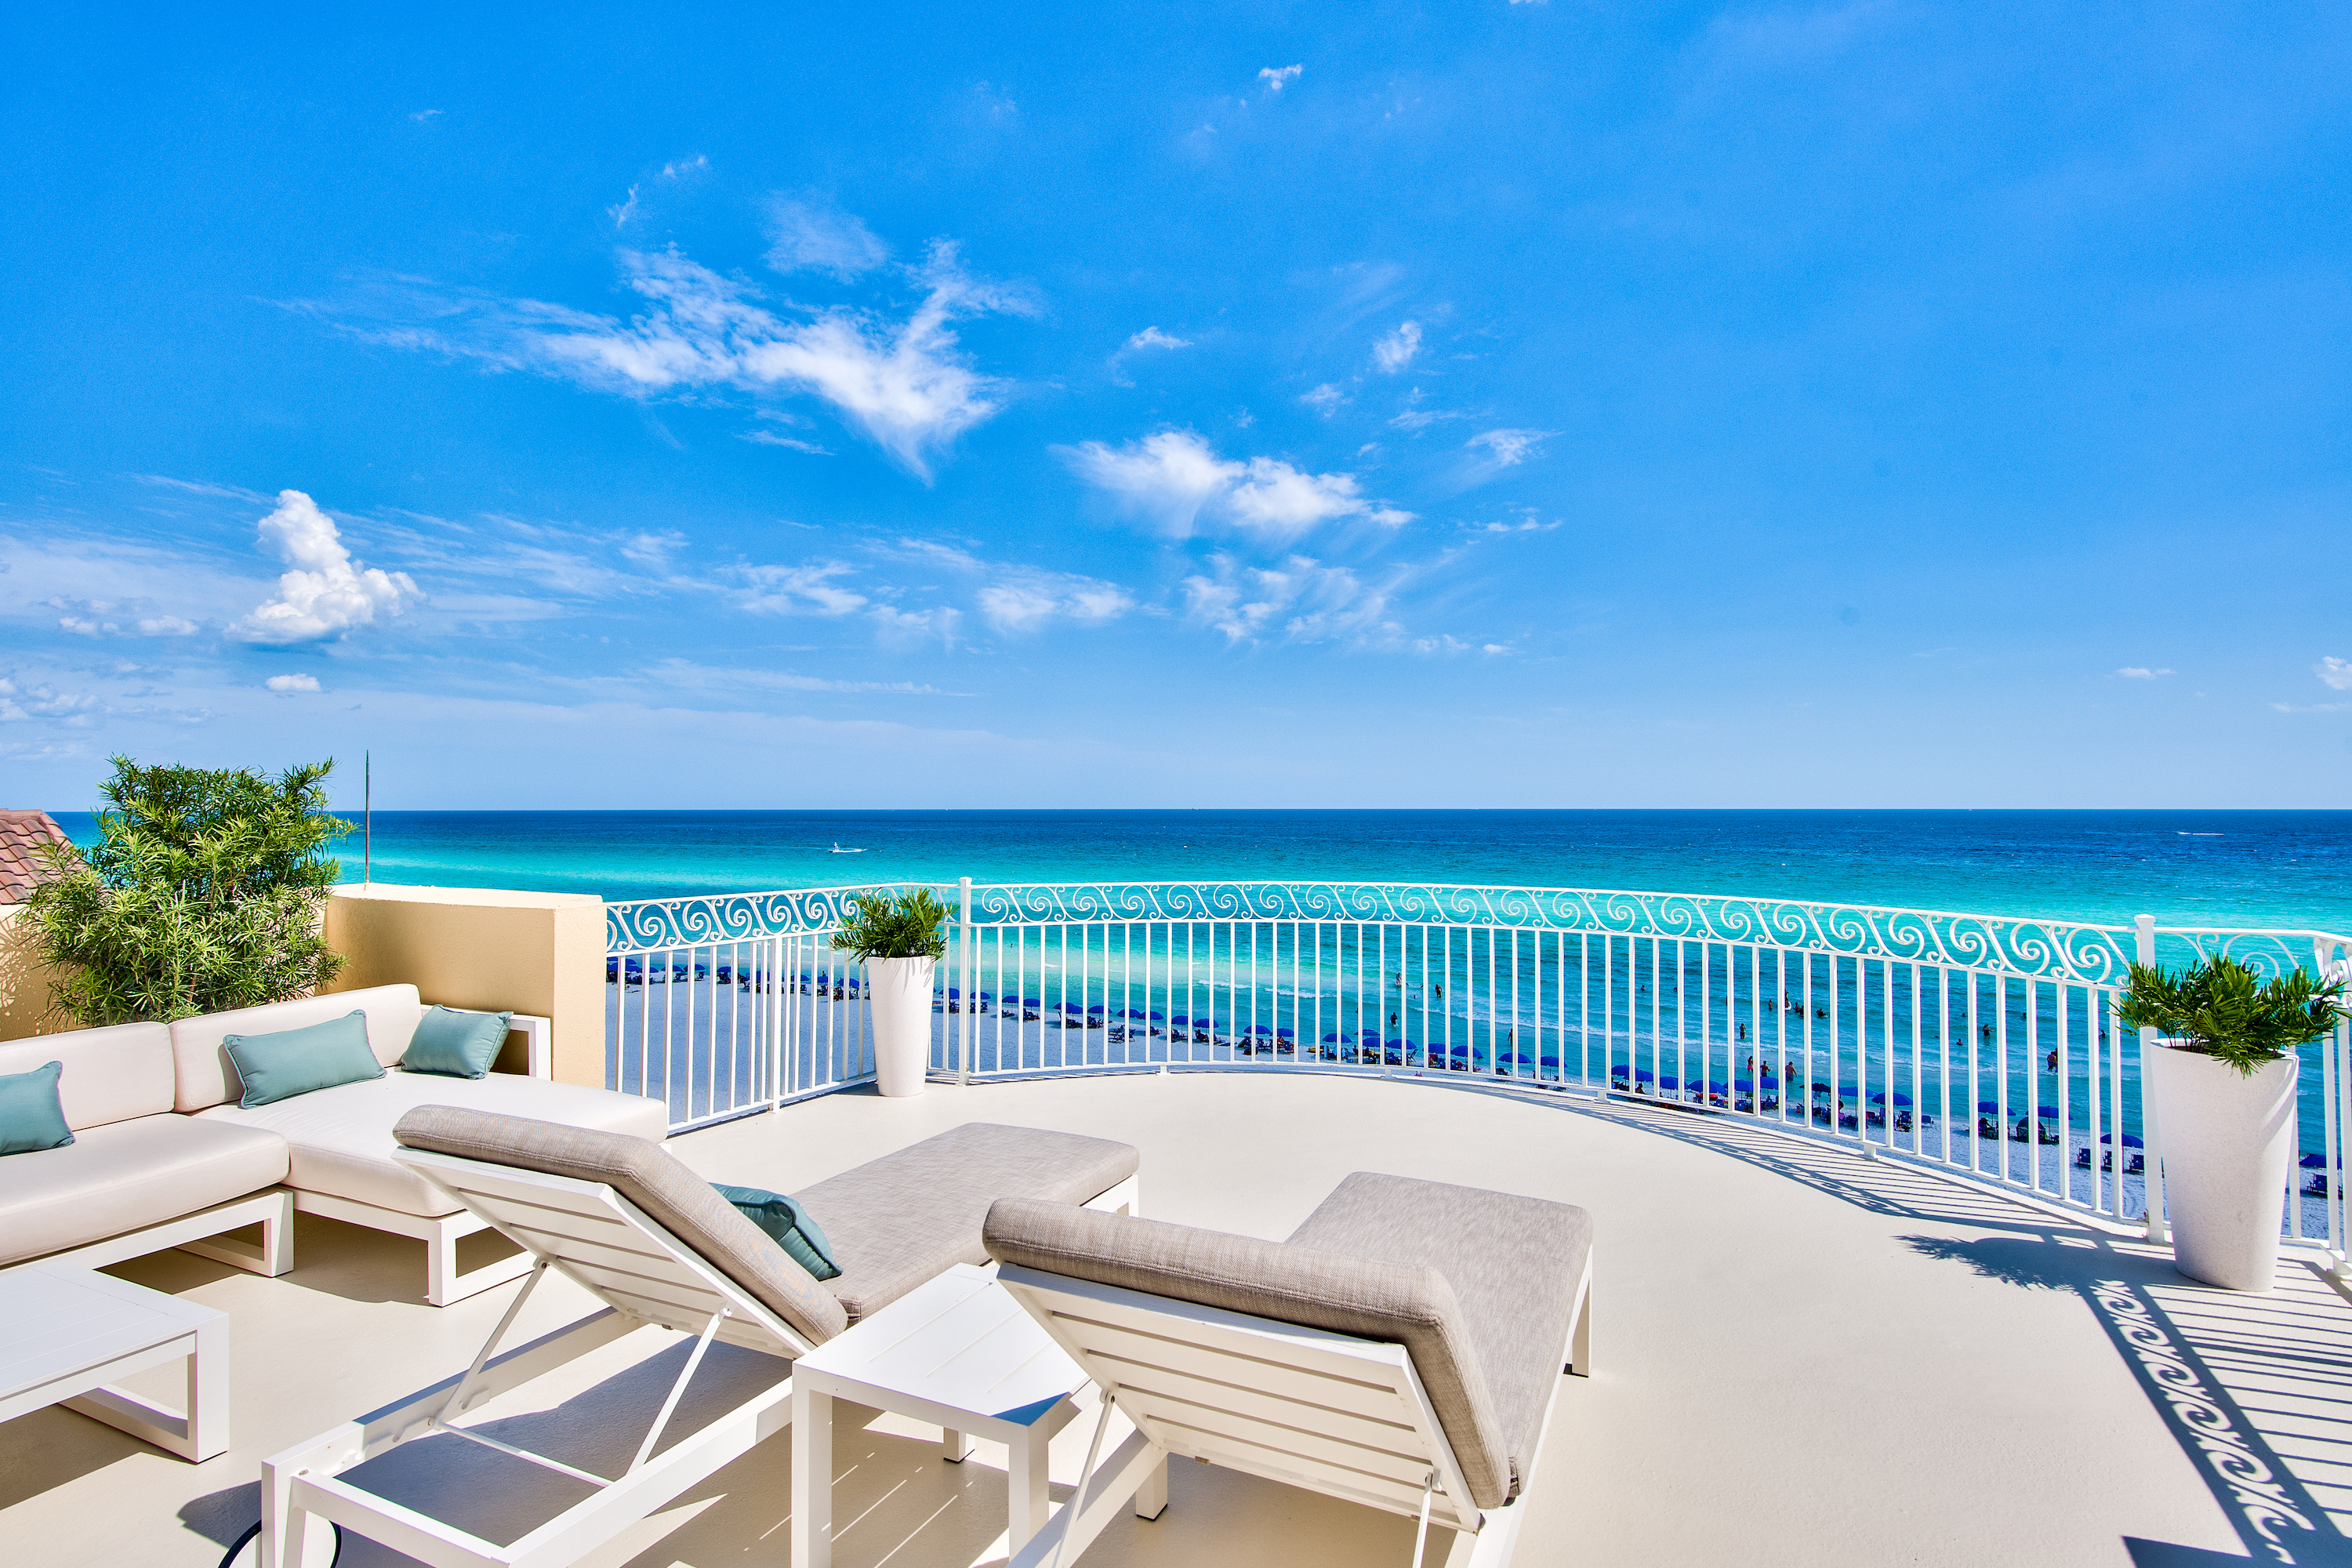 A restful view of turquoise Gulf waters from the roof top terrace of a Gulf front home in Destin